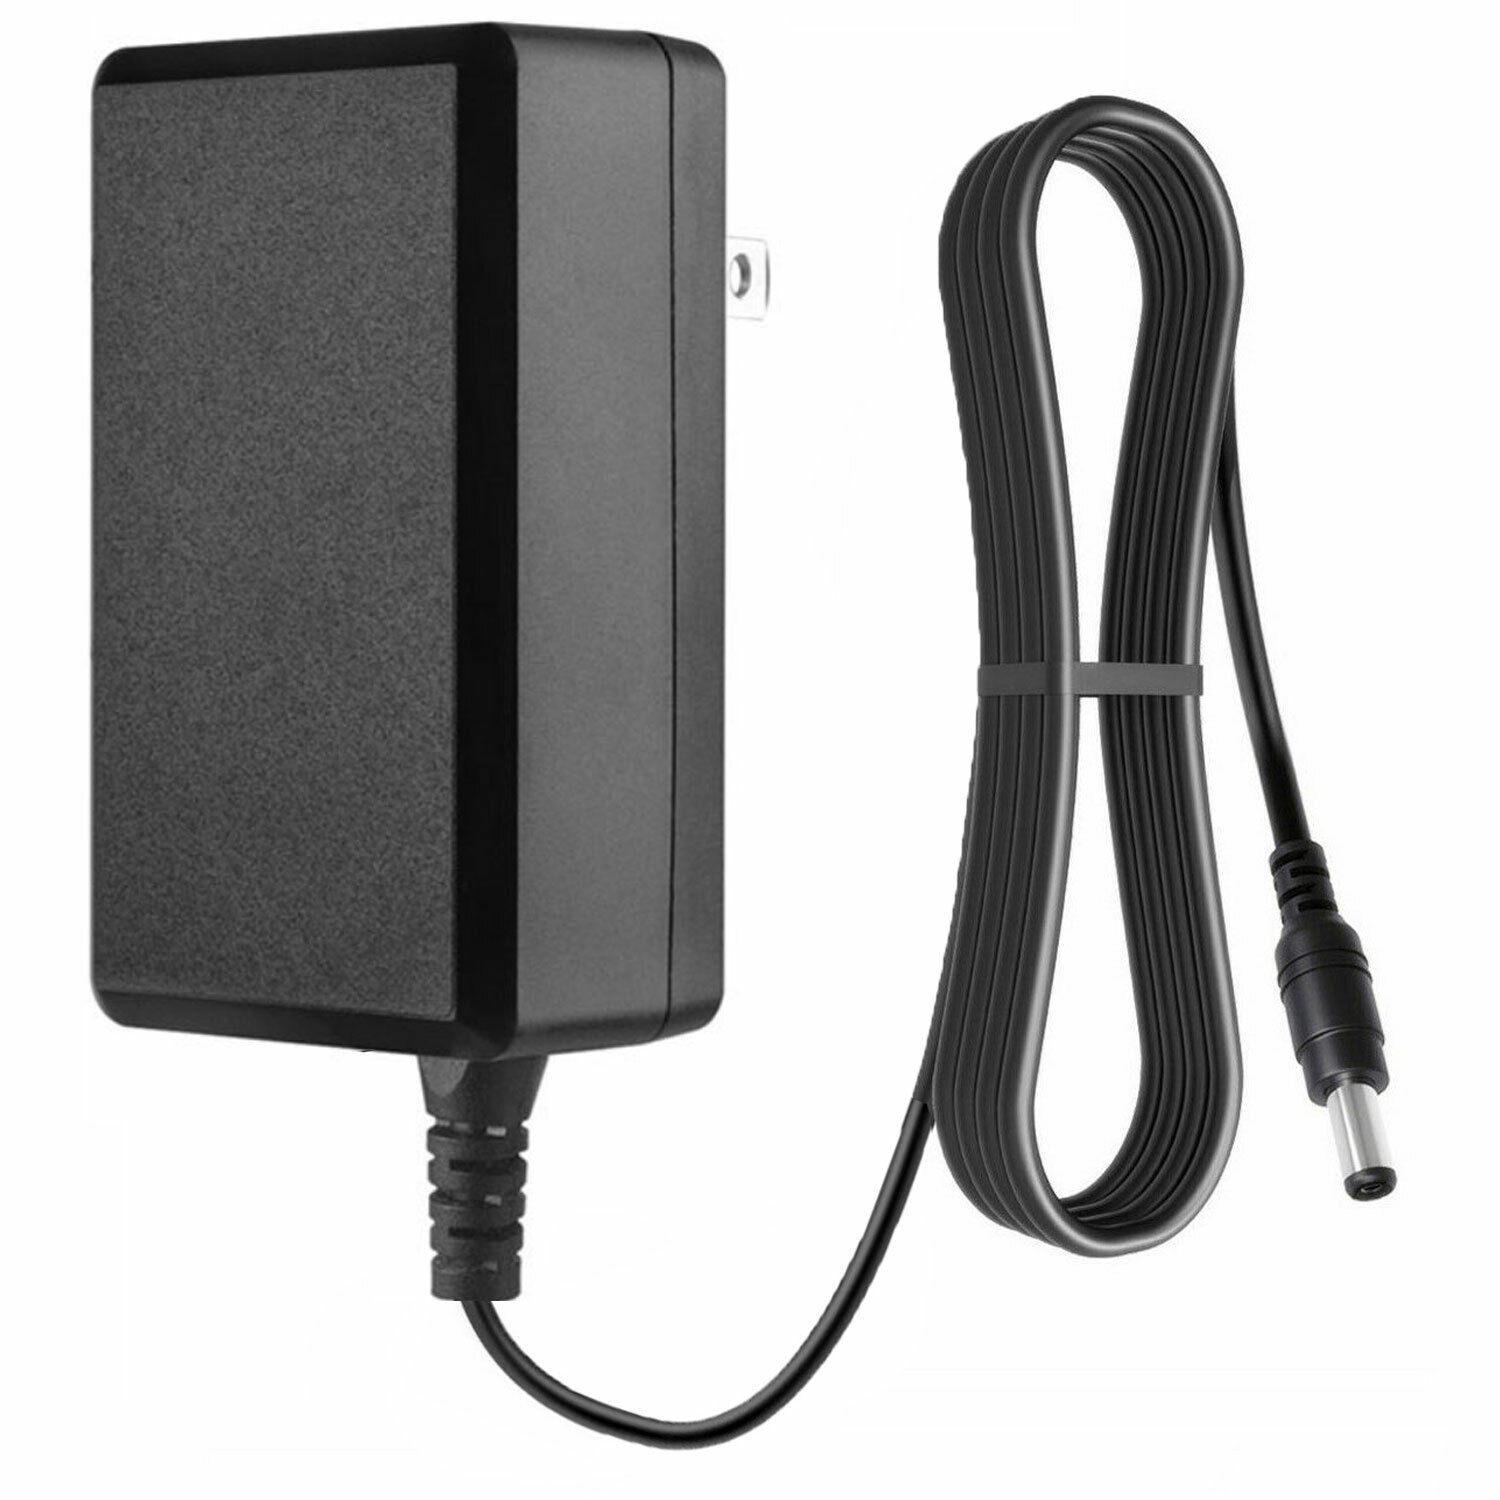 *Brand NEW*100-240VAC Lorex SG19LD804-161 Security CHARGER DC replace SUPPLY CORD AC ADAPTER